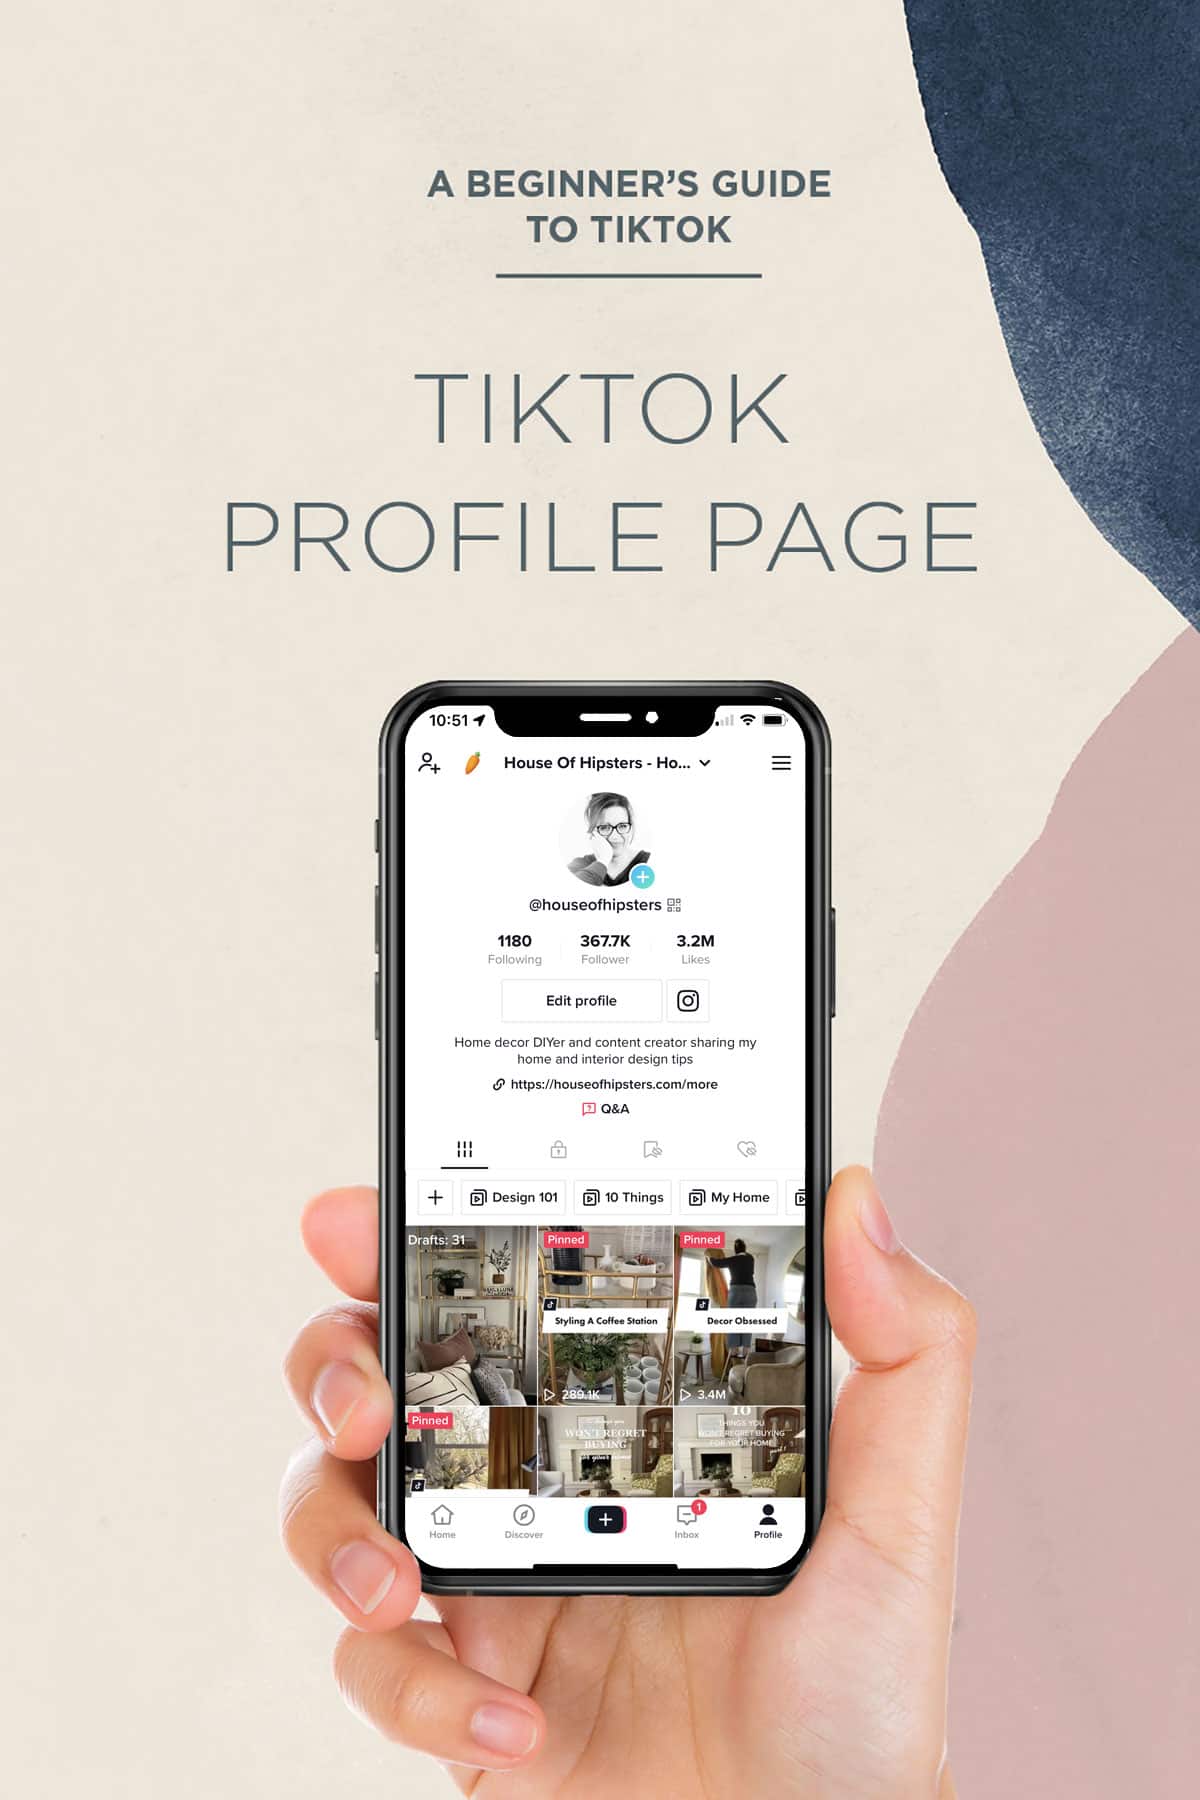 A beginner's guide to getting started on TikTok for your business and brand